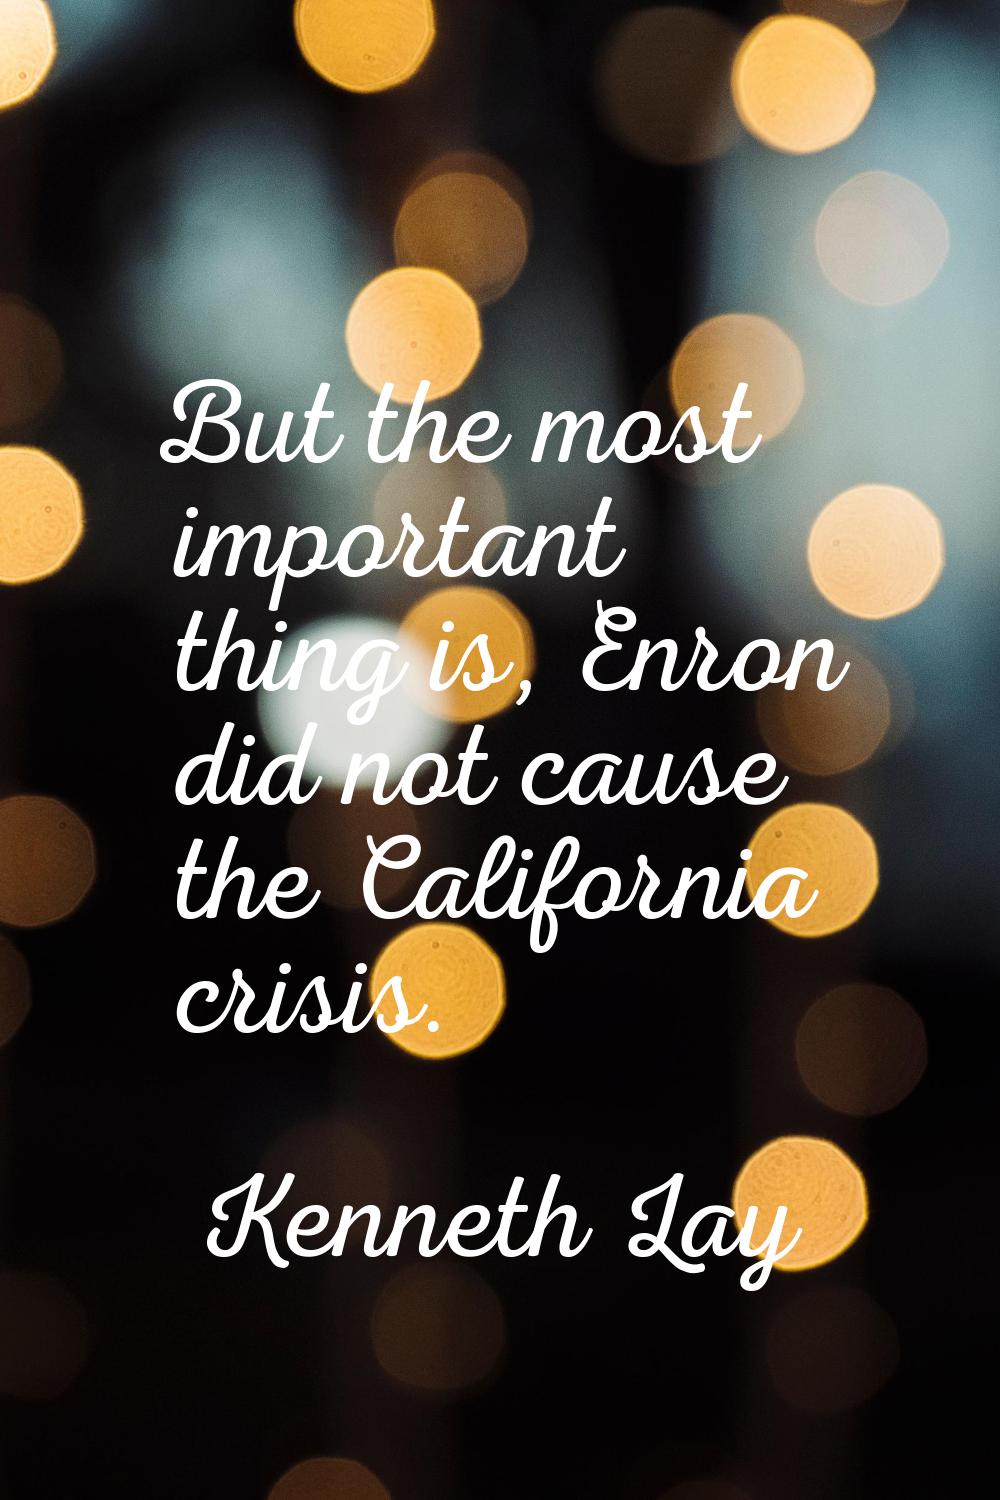 But the most important thing is, Enron did not cause the California crisis.